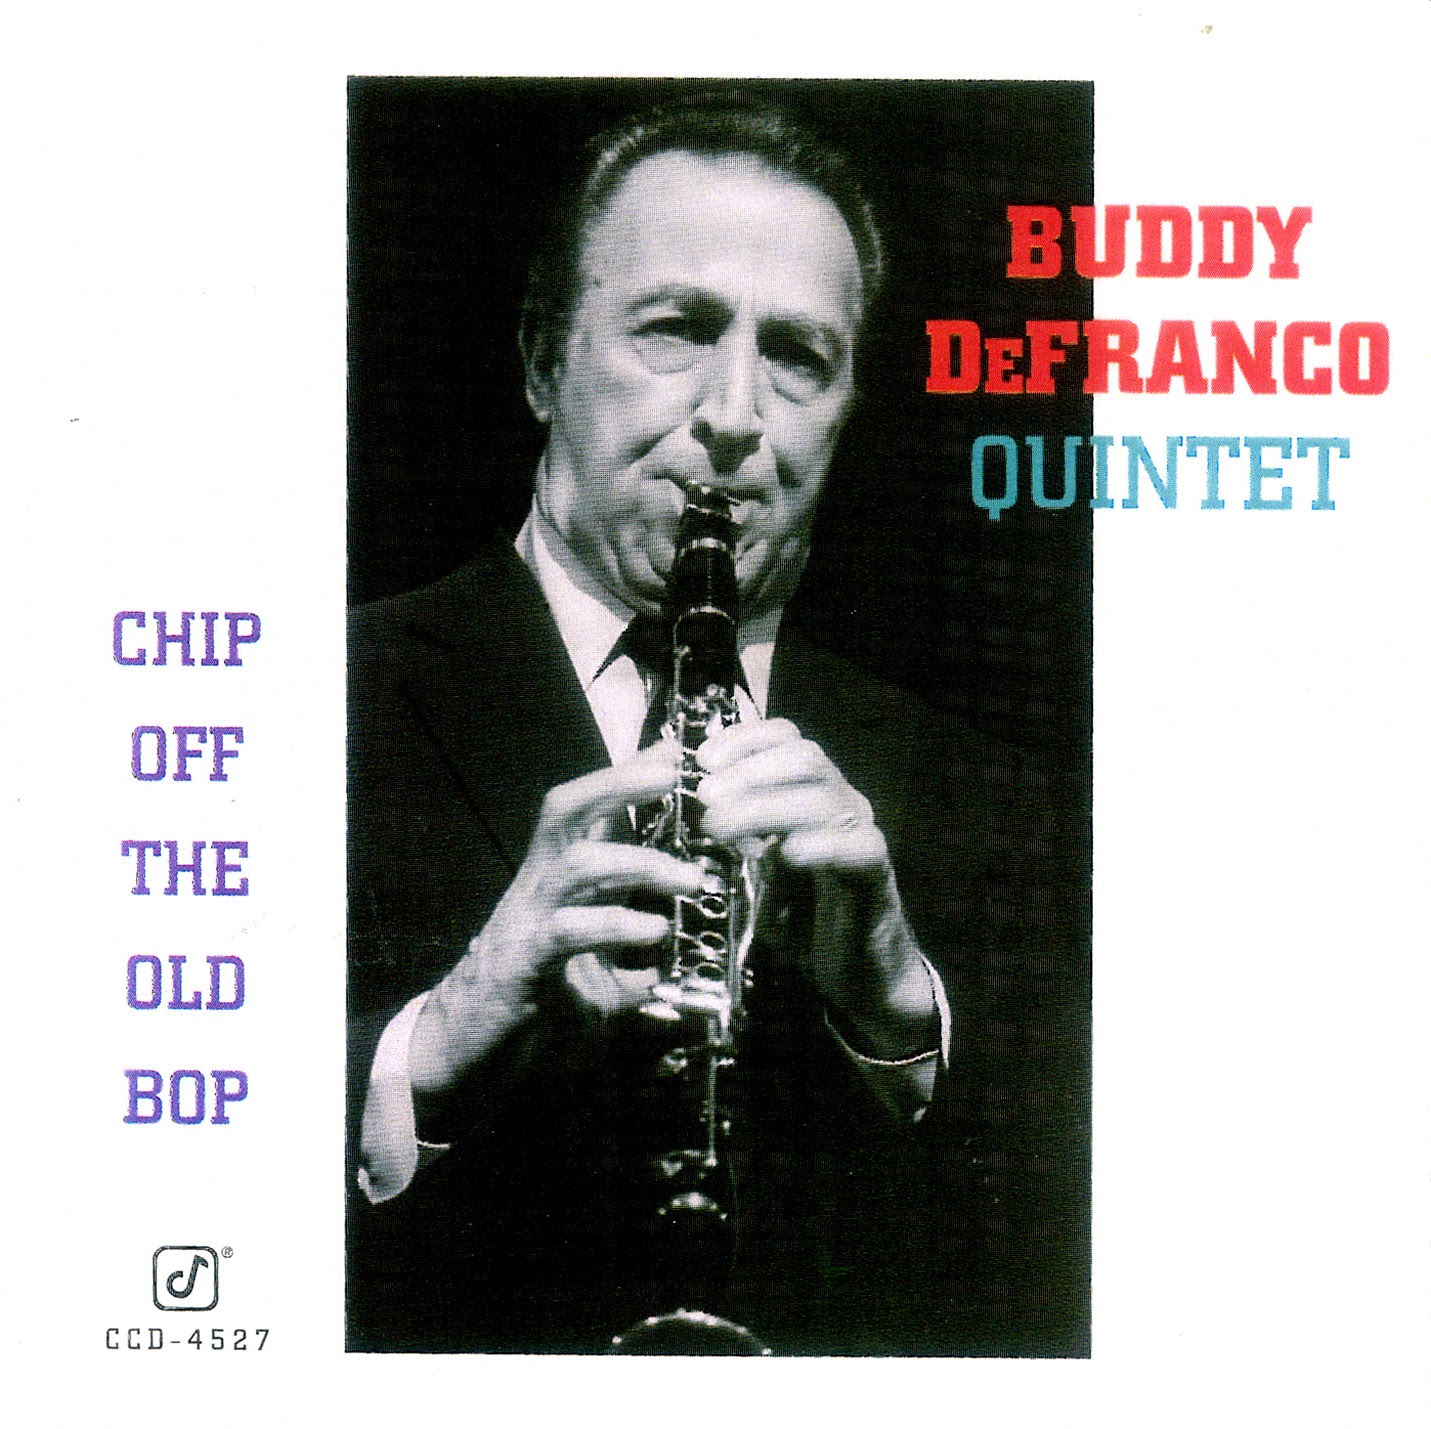 BUDDY DEFRANCO - Chip Off the Old Bop cover 